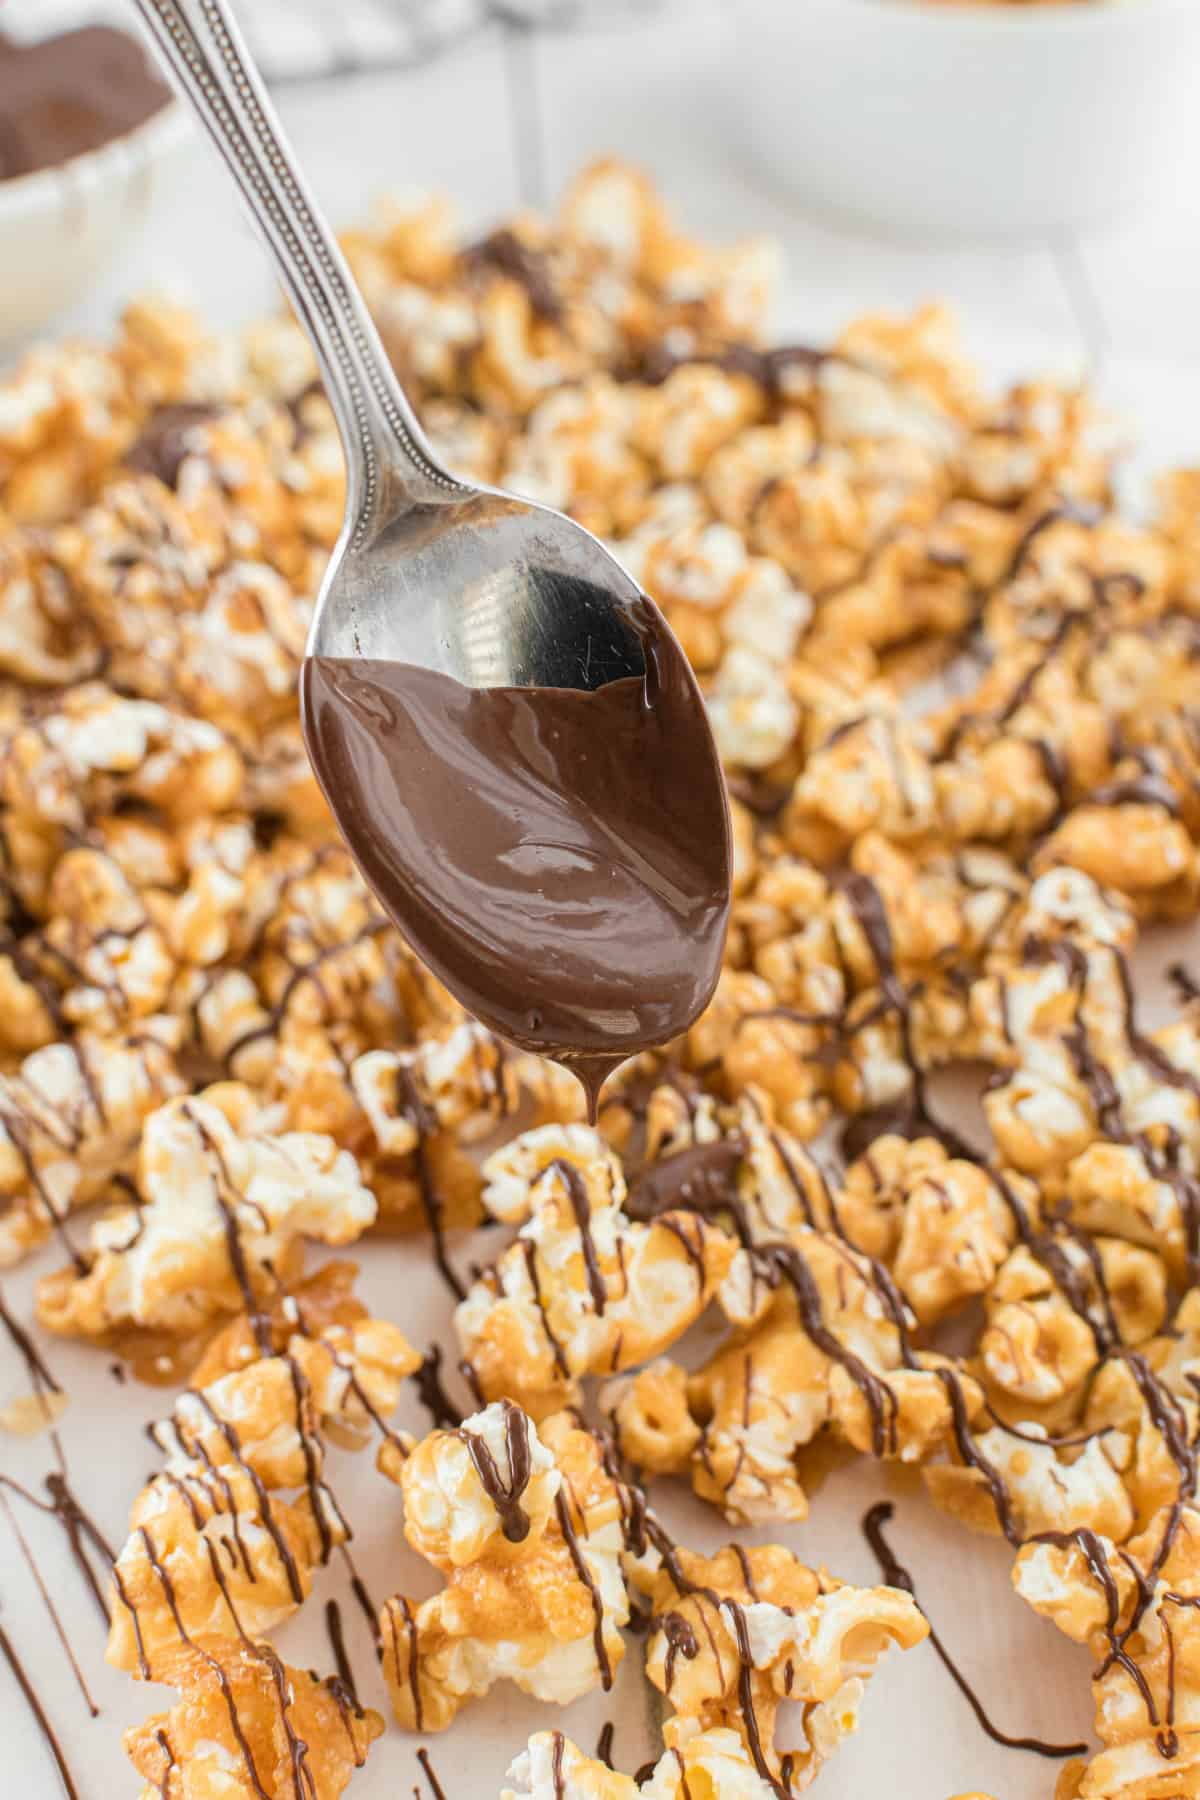 Caramel corn being drizzled with chocolate from a spoon.